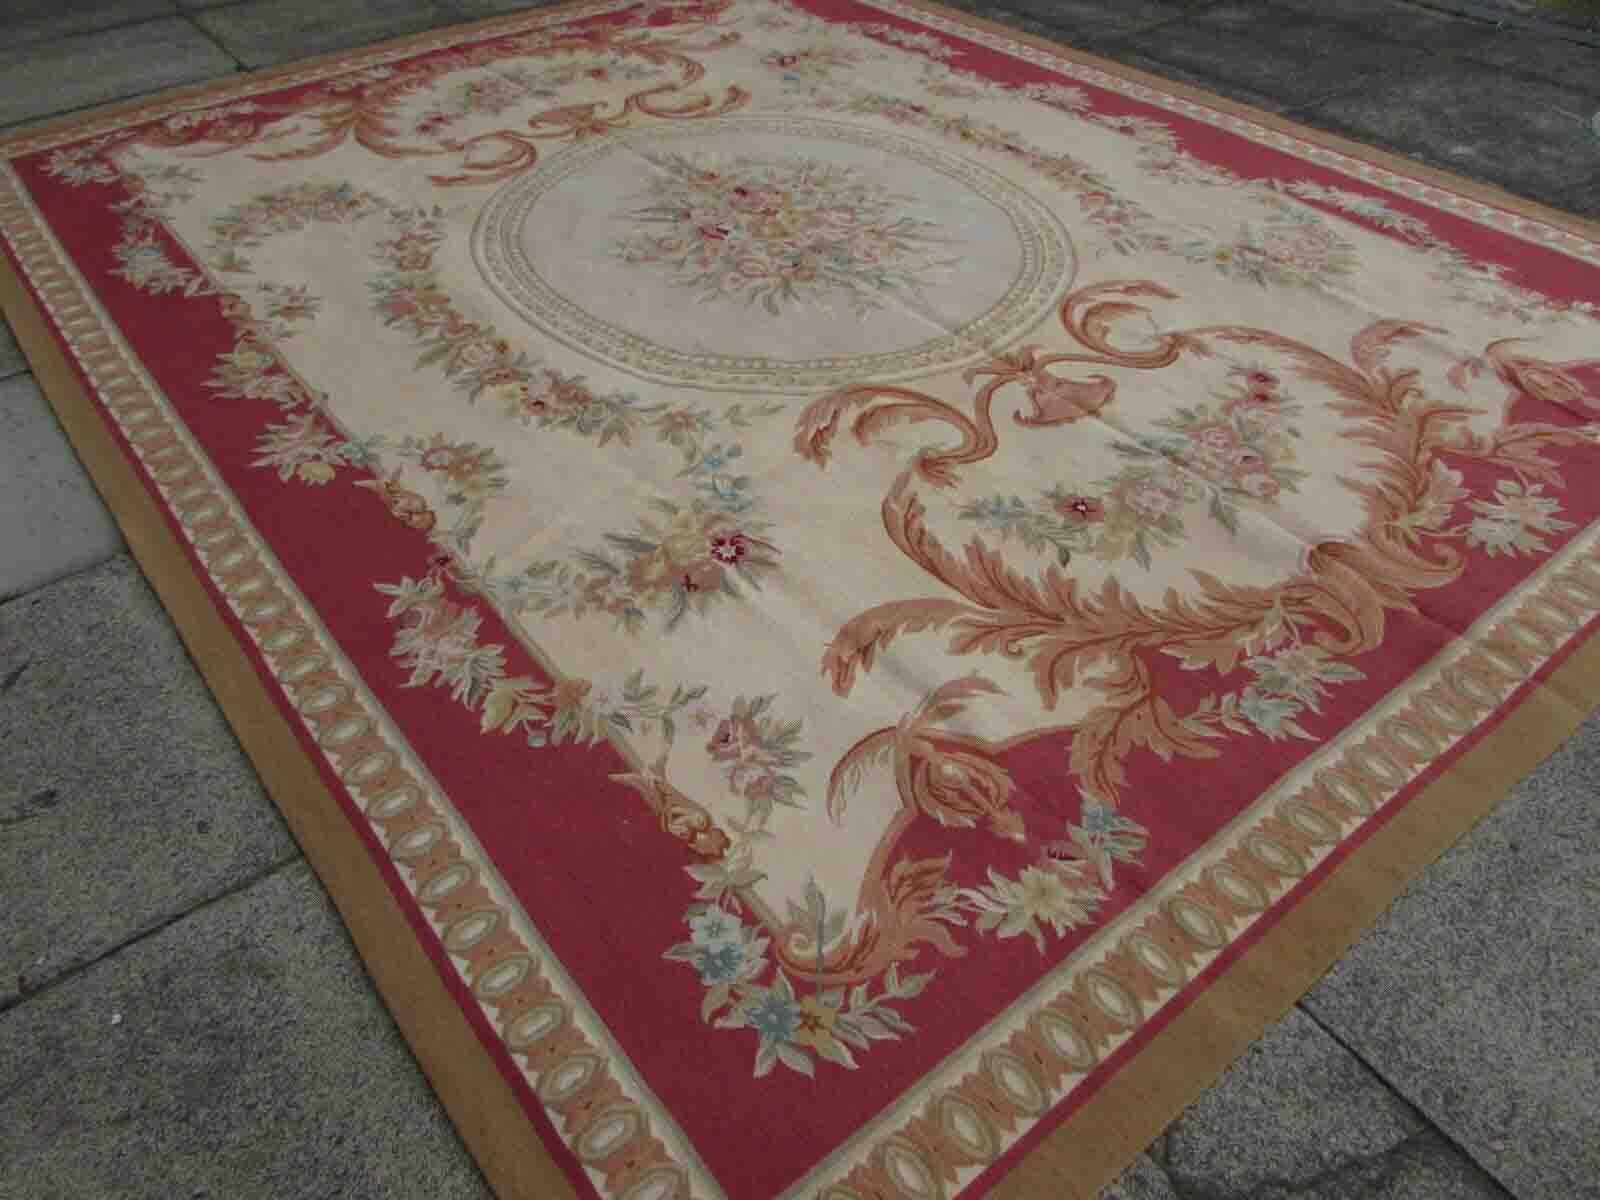 Handmade vintage French Aubusson rug in traditional design. The rug is from the end of 20th century in original good condition.

-condition: original good, 

-circa: 1970s,

-size: 7.9' x 10' (243cm x 306cm),

-material: wool,

-country of